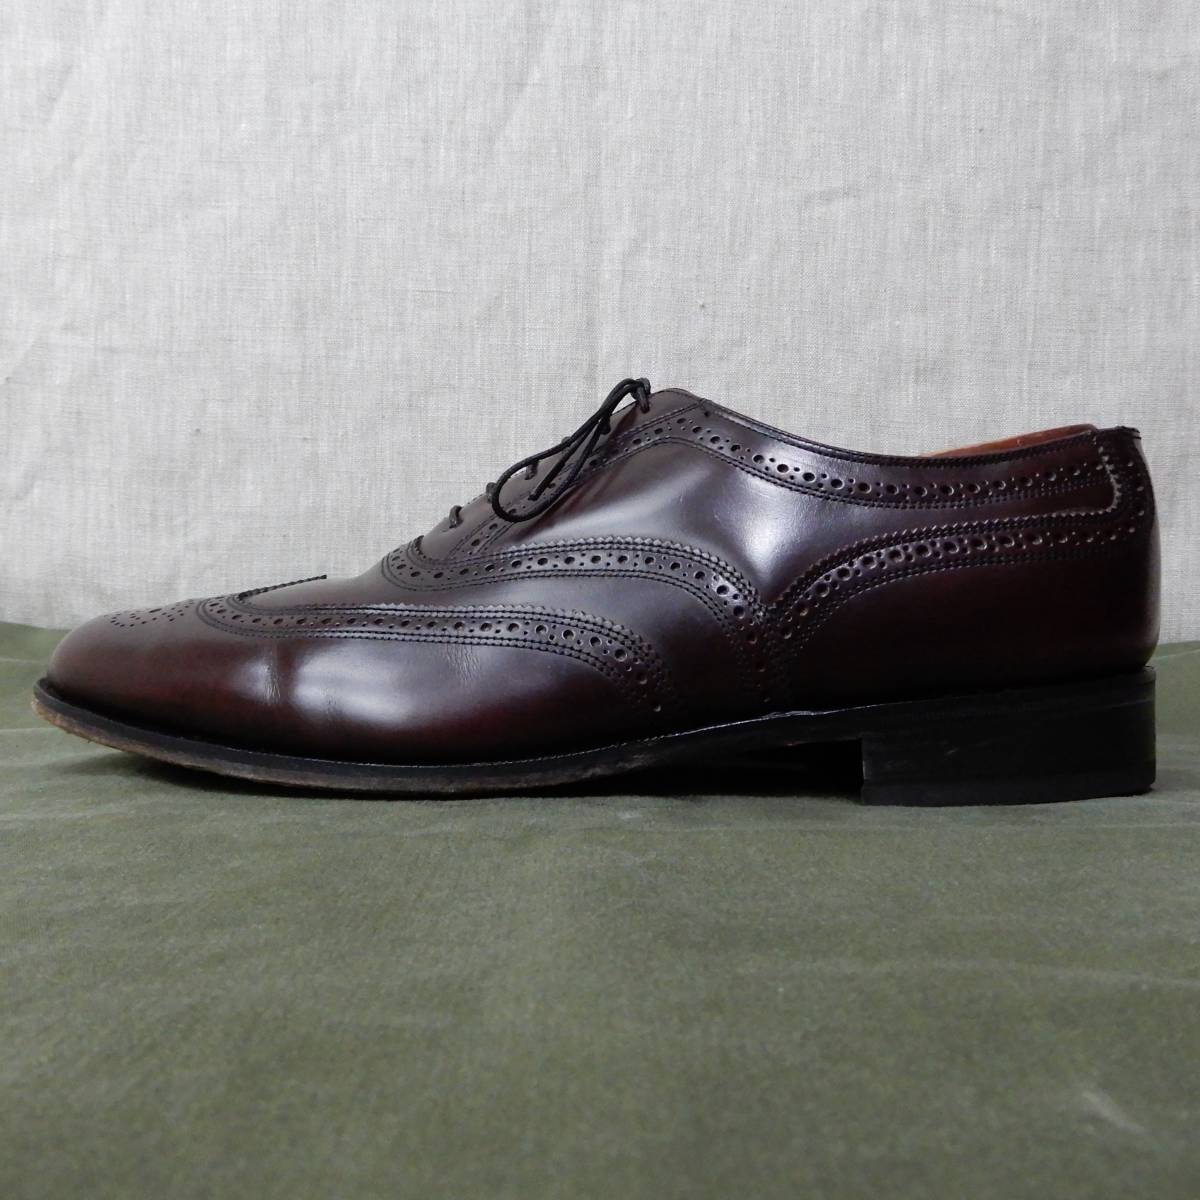 FLORSHEIM Wing Tip Shoes 1982s Size10.5E Vintage フローシャイム ウィングチップシューズ 1982年製 ヴィンテージ 革靴 28.5cm_画像3